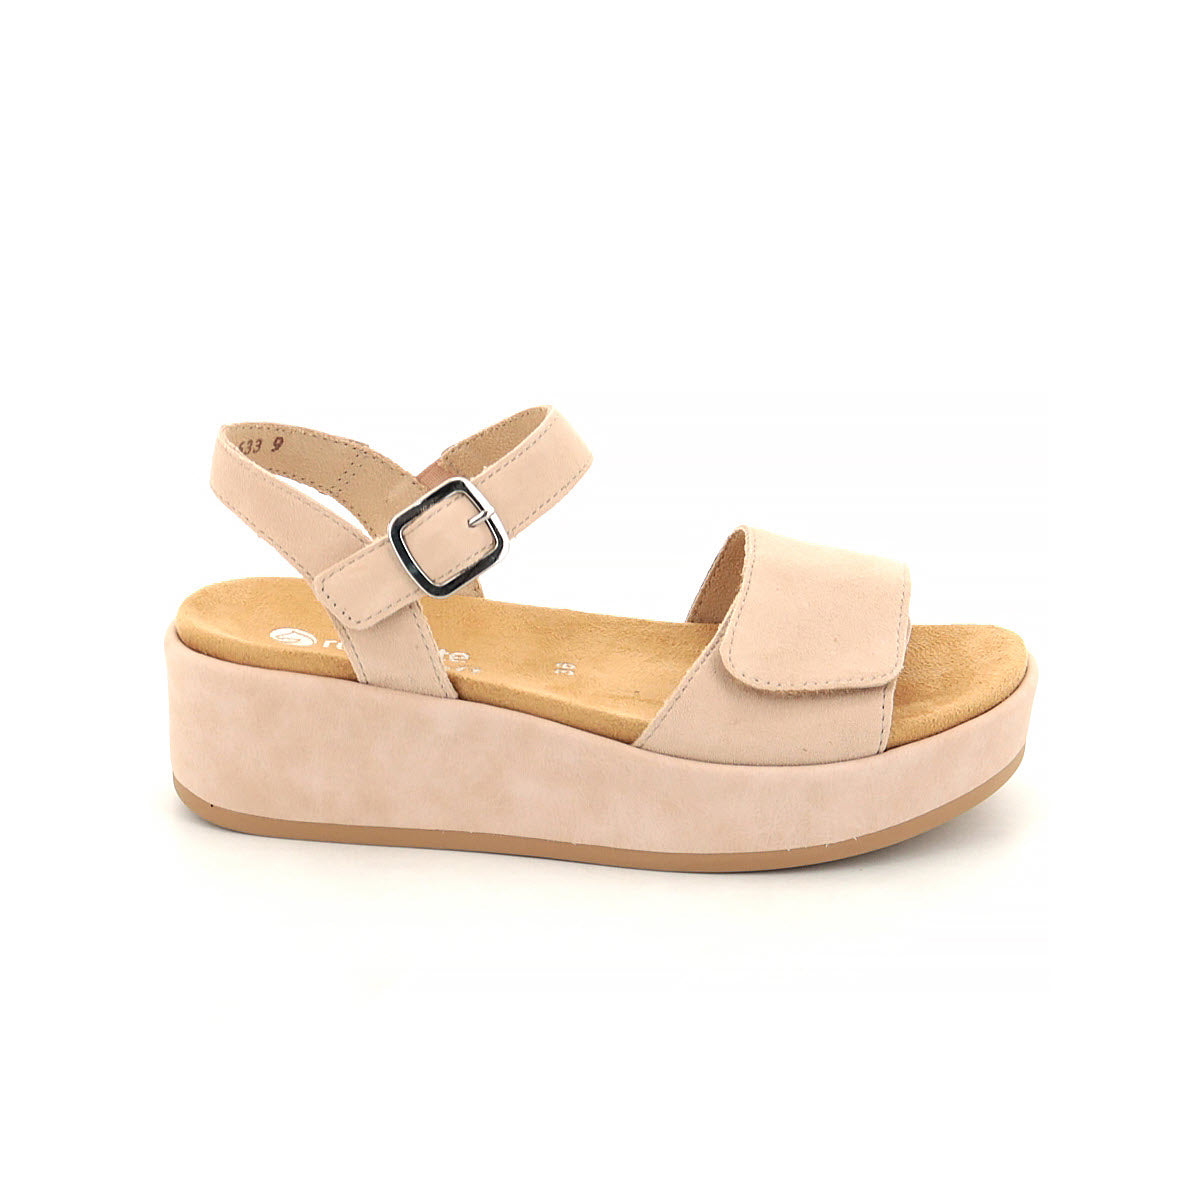 A single blush REMONTE PLATFORM ANKLE STRAP SANDAL - WOMENS with an ankle strap and buckle, featuring a cushioned sole with Lite ‘n Soft technology and a closed toe design, made from breathable microvelour, on a plain white background.